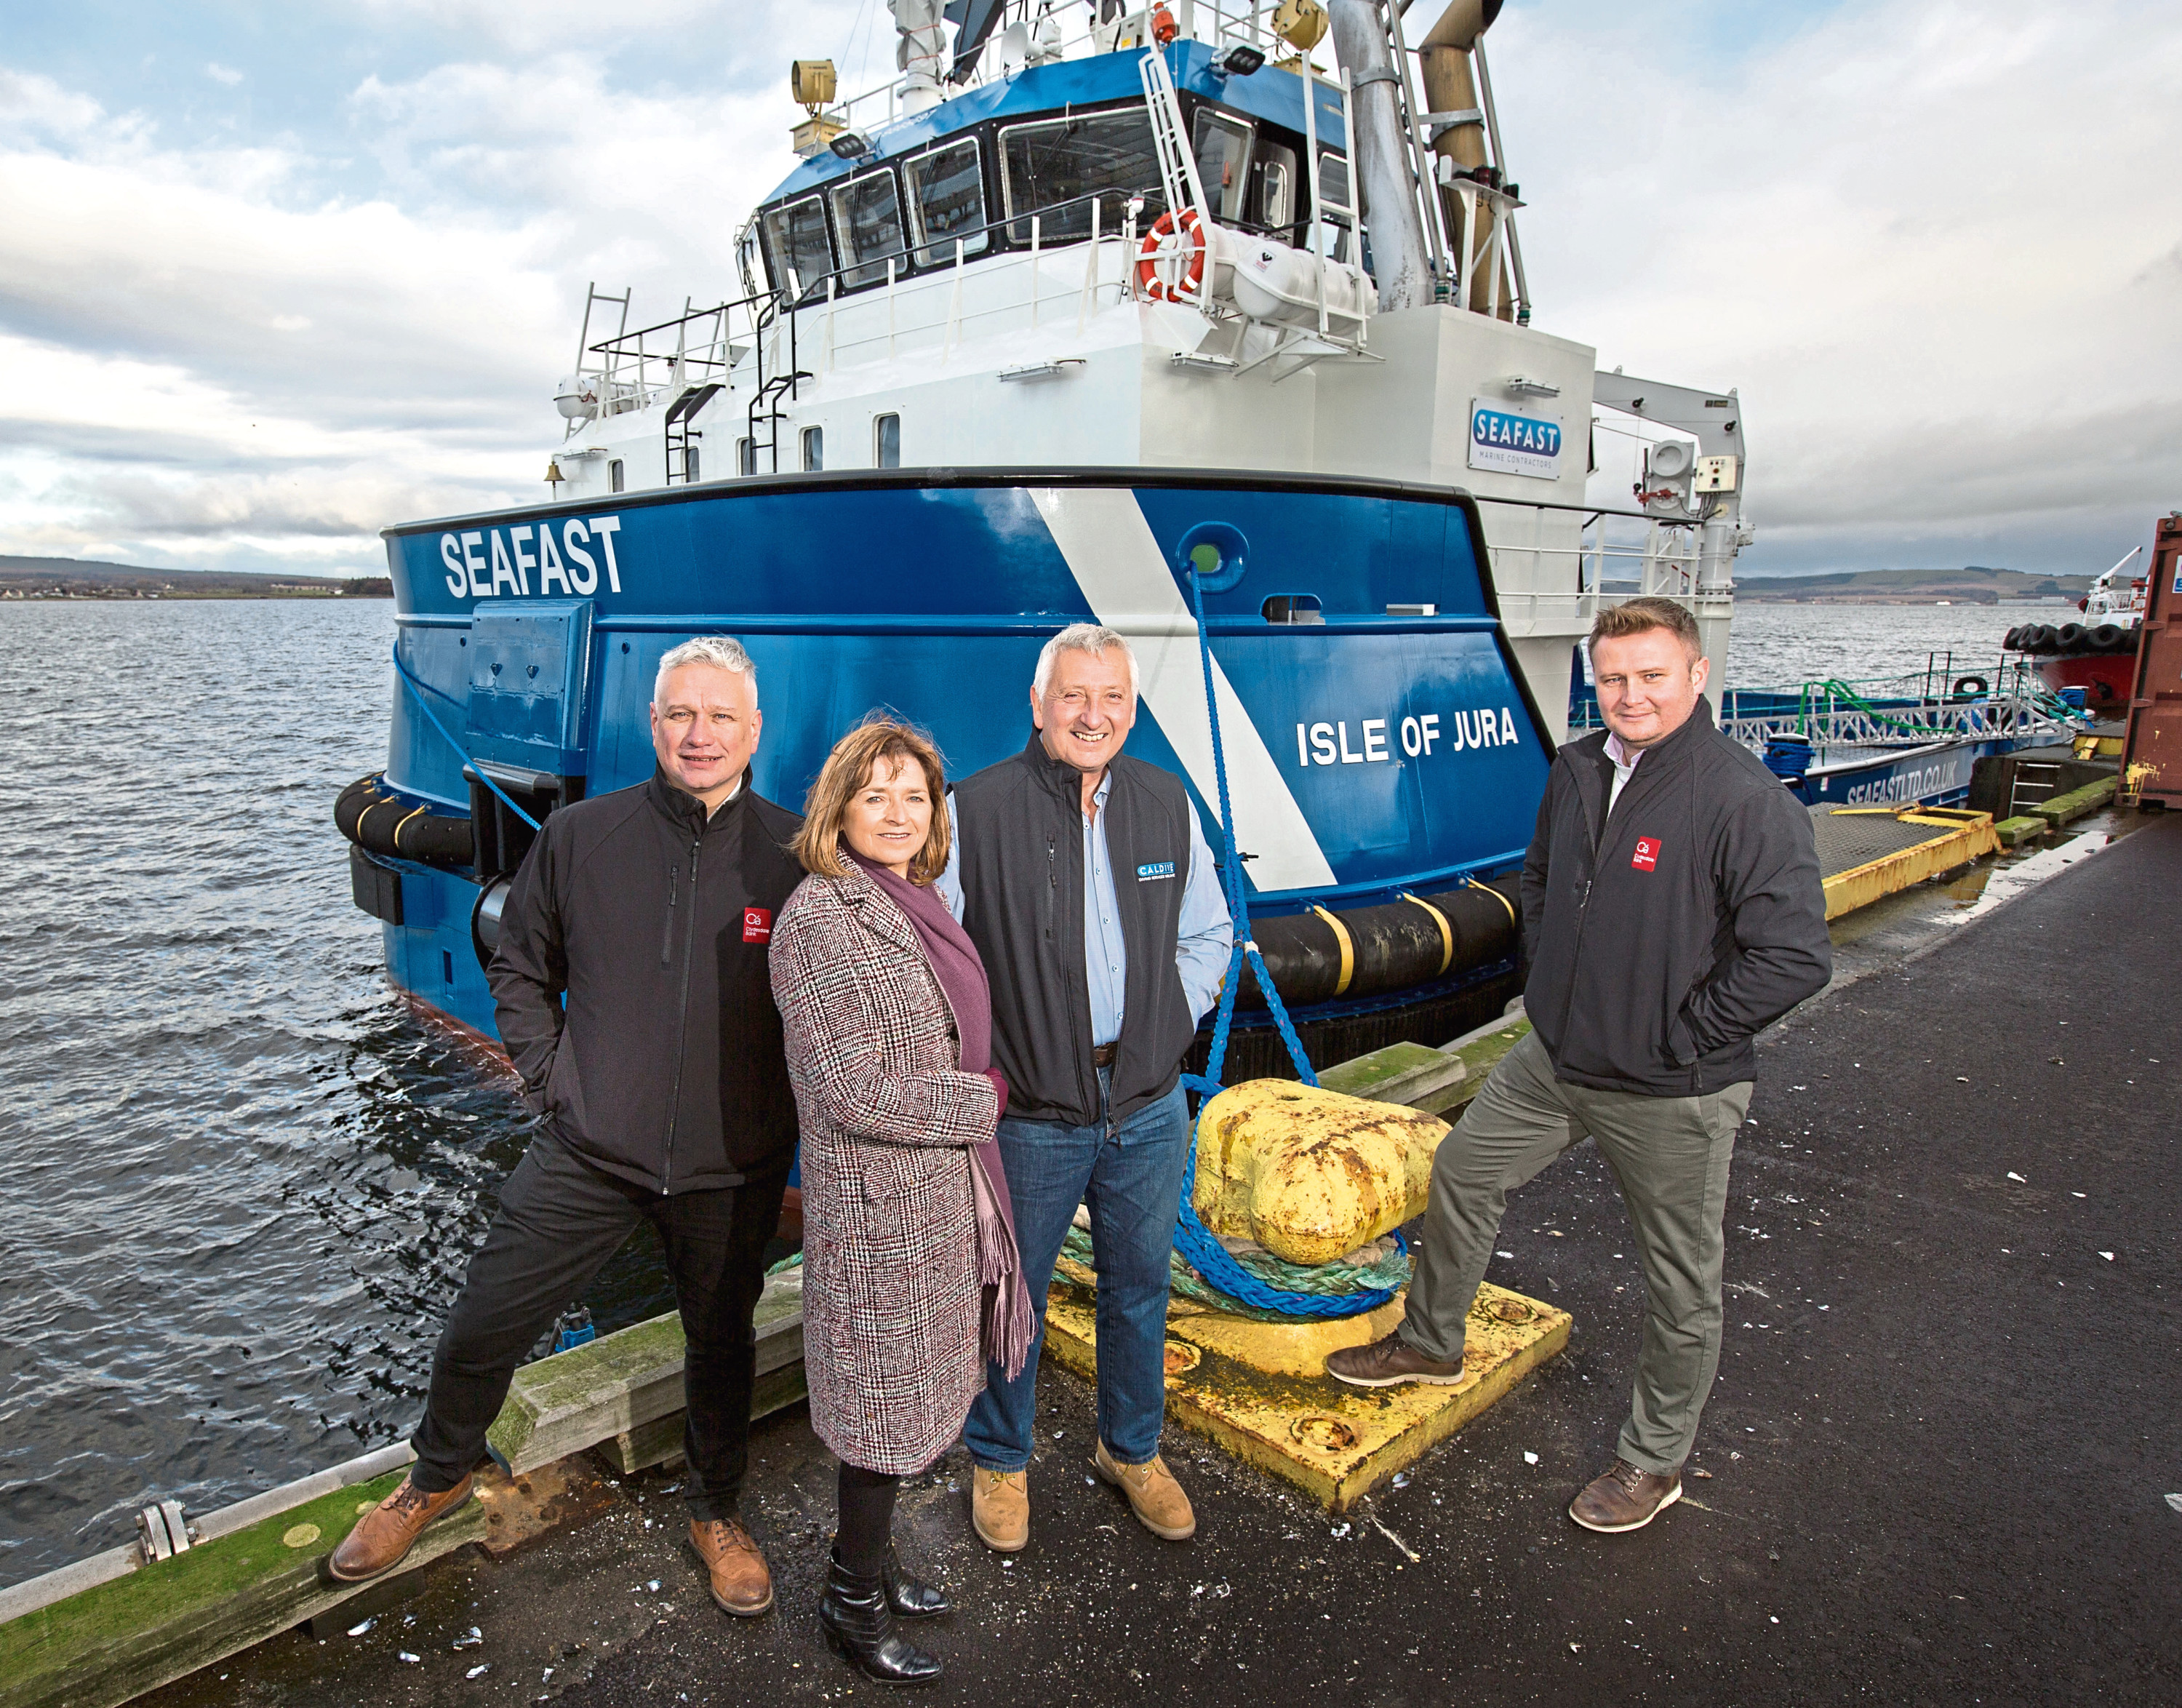 Caldive and The Clydesdale Bank.

(from left to right) George Moodie, Commercial Area Manager for North Scotland, Clydesdale Bank. Sandra Wilkie, Director, Caldive Ltd. Iain Beaton, Managing Director, Caldive Ltd. Graeme Johnston, Commercial Relationship Manager, Clydesdale Bank.